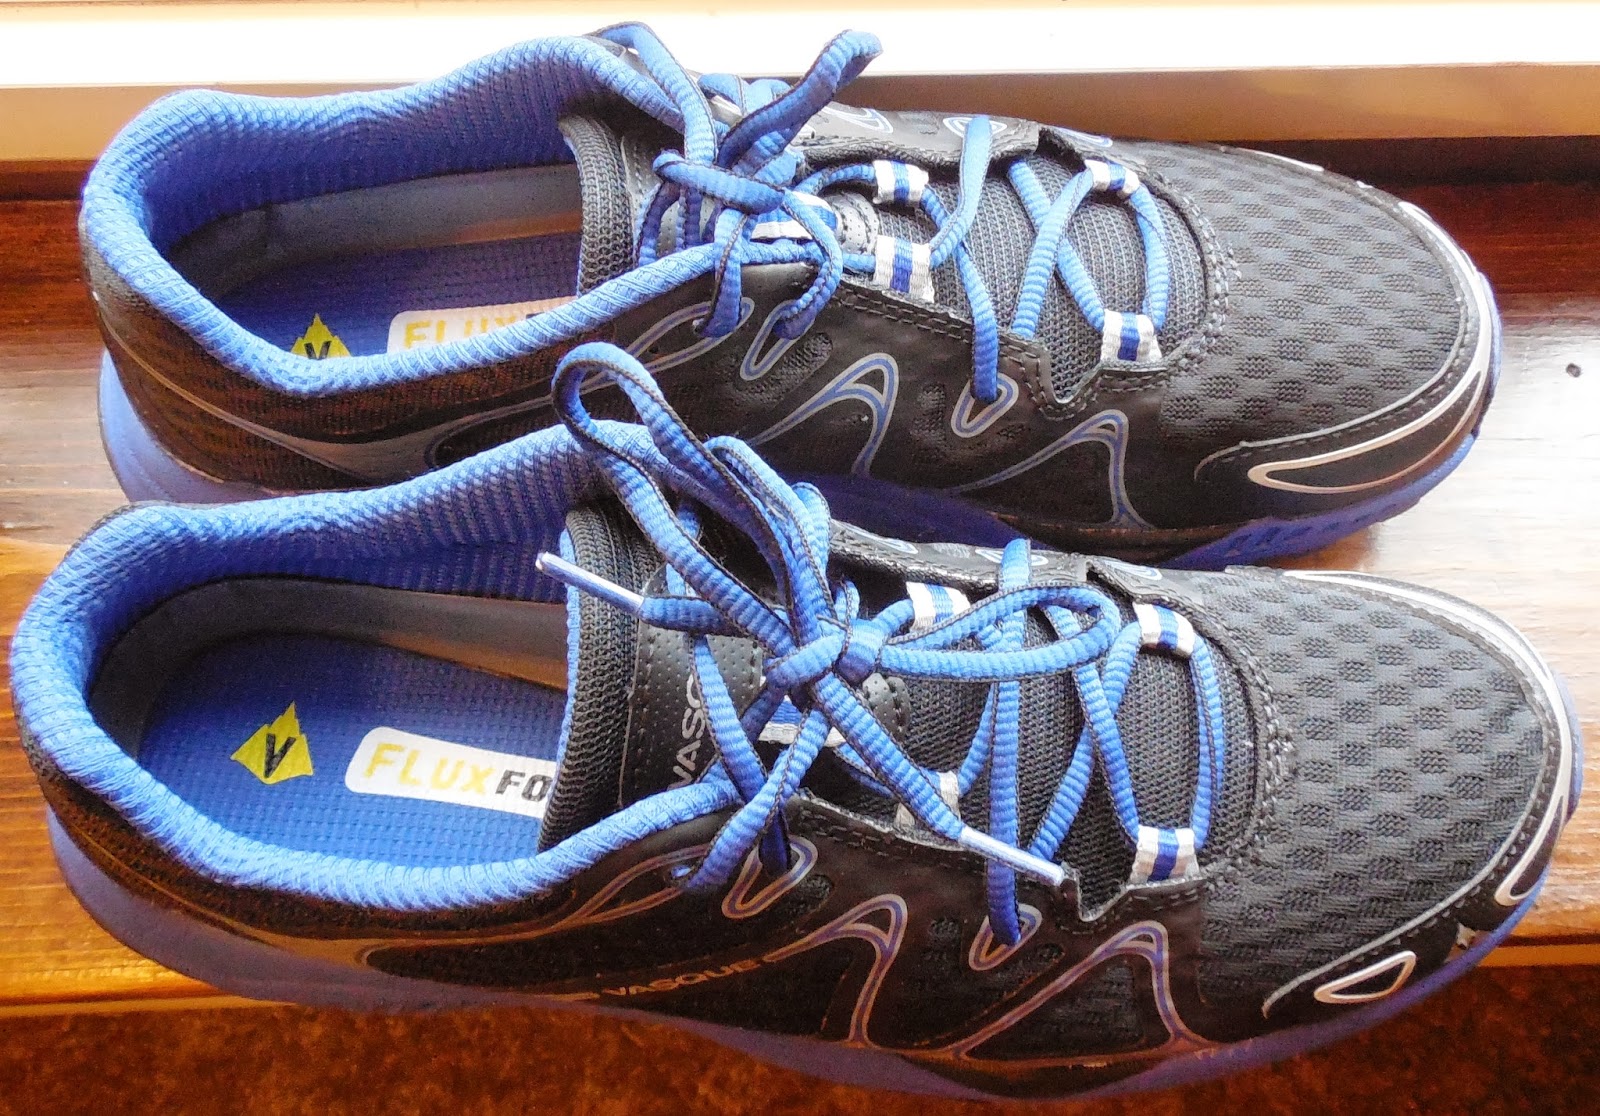 Vasque Shoes Review | The Nutritionist Reviews